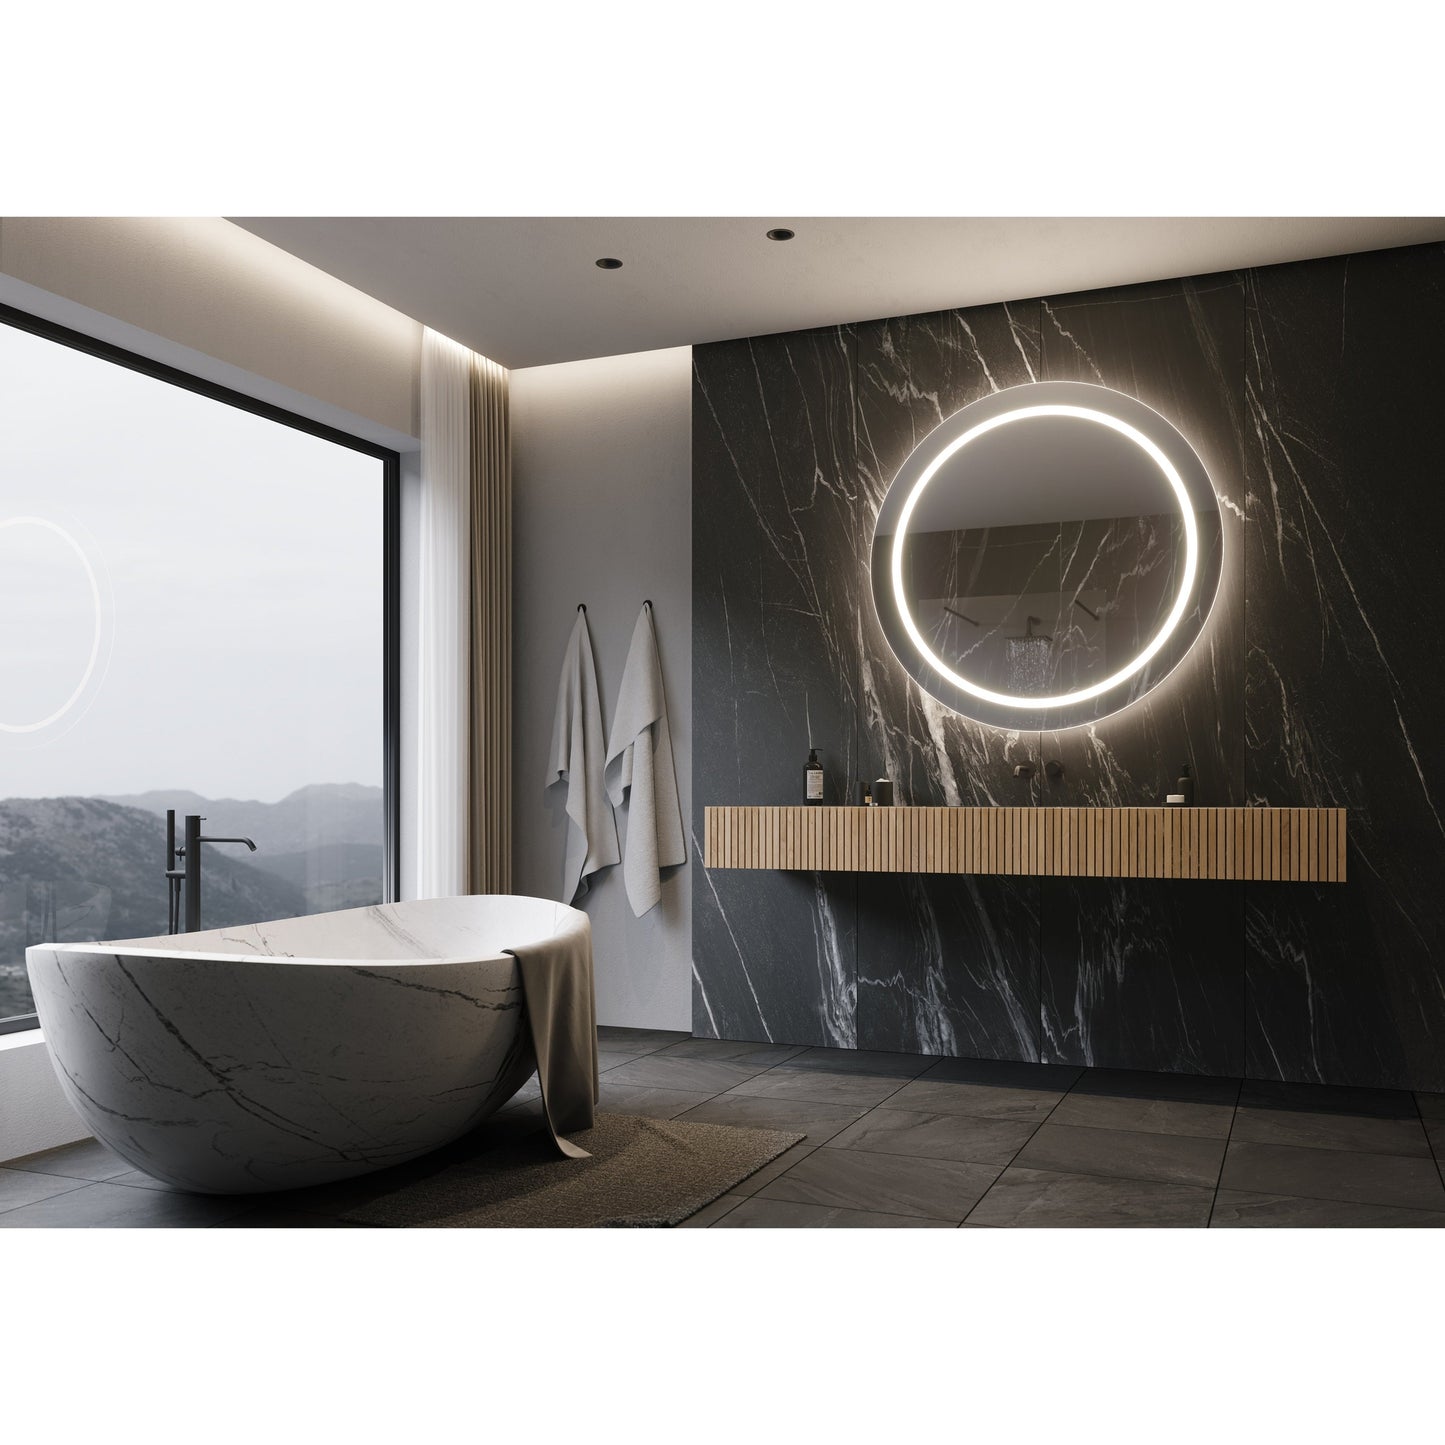 Paris Mirror Harmony Round 44" x 44" Front-Lit Illuminated Super Bright Dimmable Wall-Mounted 3000K LED Mirror With Polished Edges